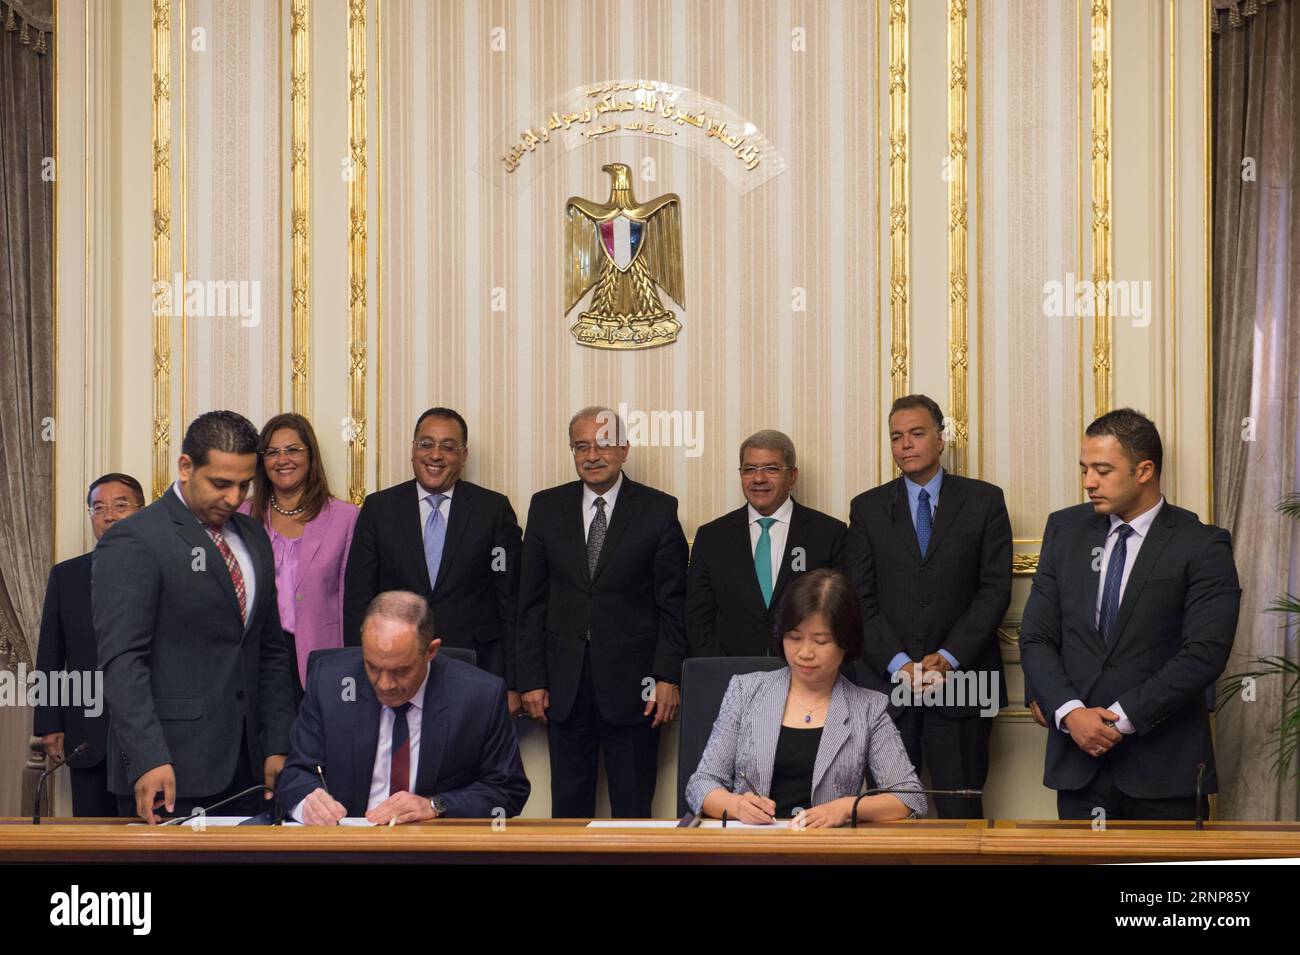 (170815) -- CAIRO, Aug. 15, 2017 -- Egyptian Prime Minister Sherif Ismail (4th R, Rear) attends the signing ceremony between Egypt s National Authority for Tunnels (NAT) and the joint coalition of China s AVIC International and China Railway Group Limited in Cairo, Egypt, on Aug. 15, 2017. The Egyptian Ministry of Transport and a coalition of Chinese firms signed on Tuesday an agreement worth 1.24 billion U.S. dollars to build a light rail transit in new districts around Cairo. ) EGYPT-CAIRO-CHINA-LIGHT RAIL-DEAL MengxTao PUBLICATIONxNOTxINxCHN   170815 Cairo Aug 15 2017 Egyptian Prime Ministe Stock Photo